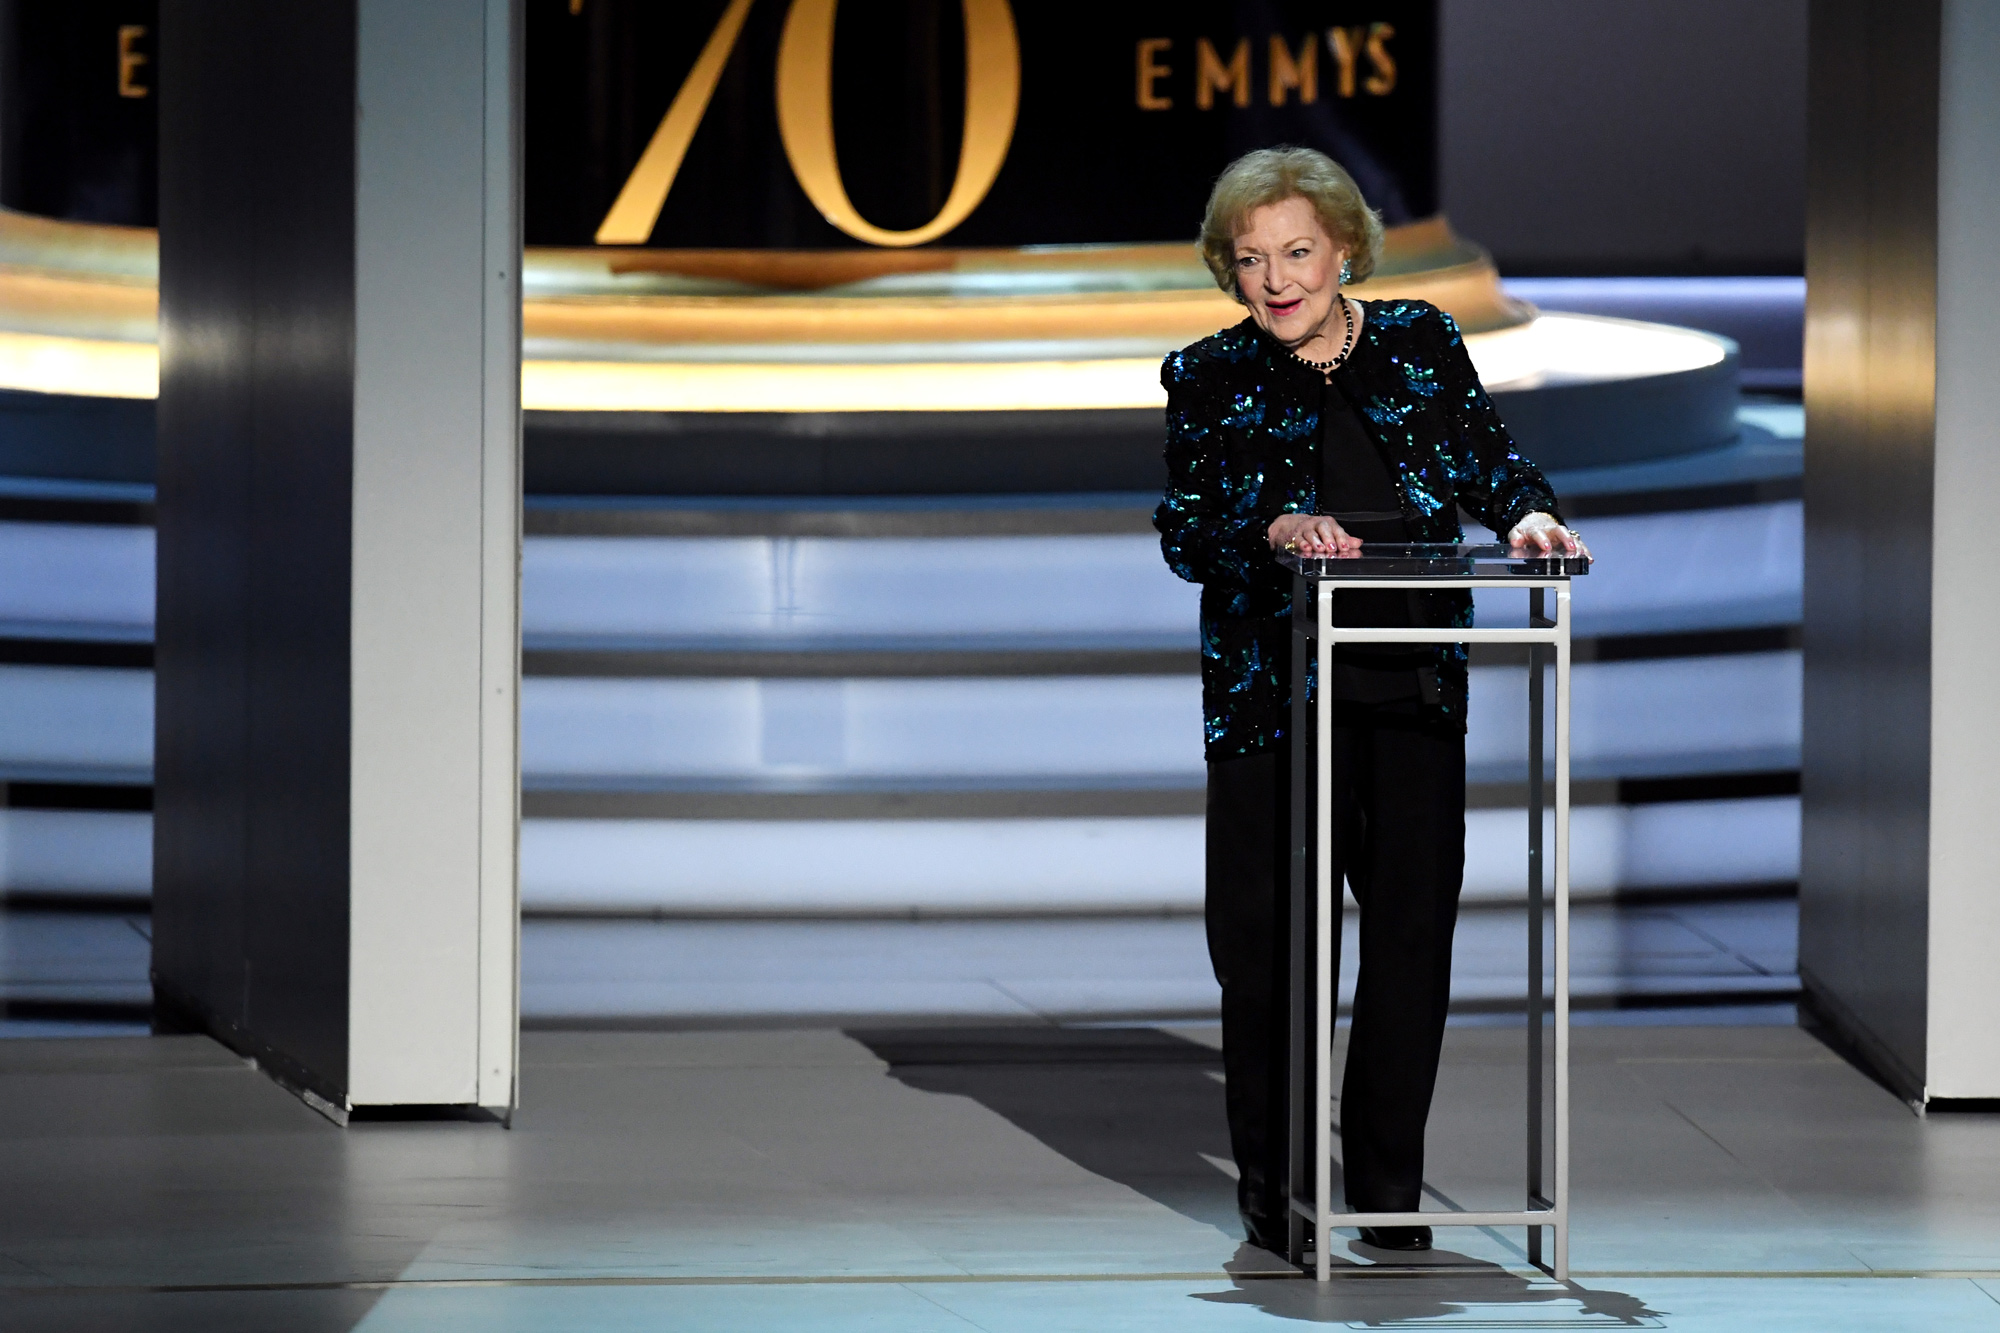 Betty White speaks onstage during the 70th Emmy Awards at Microsoft Theater on September 17, 2018, in Los Angeles.